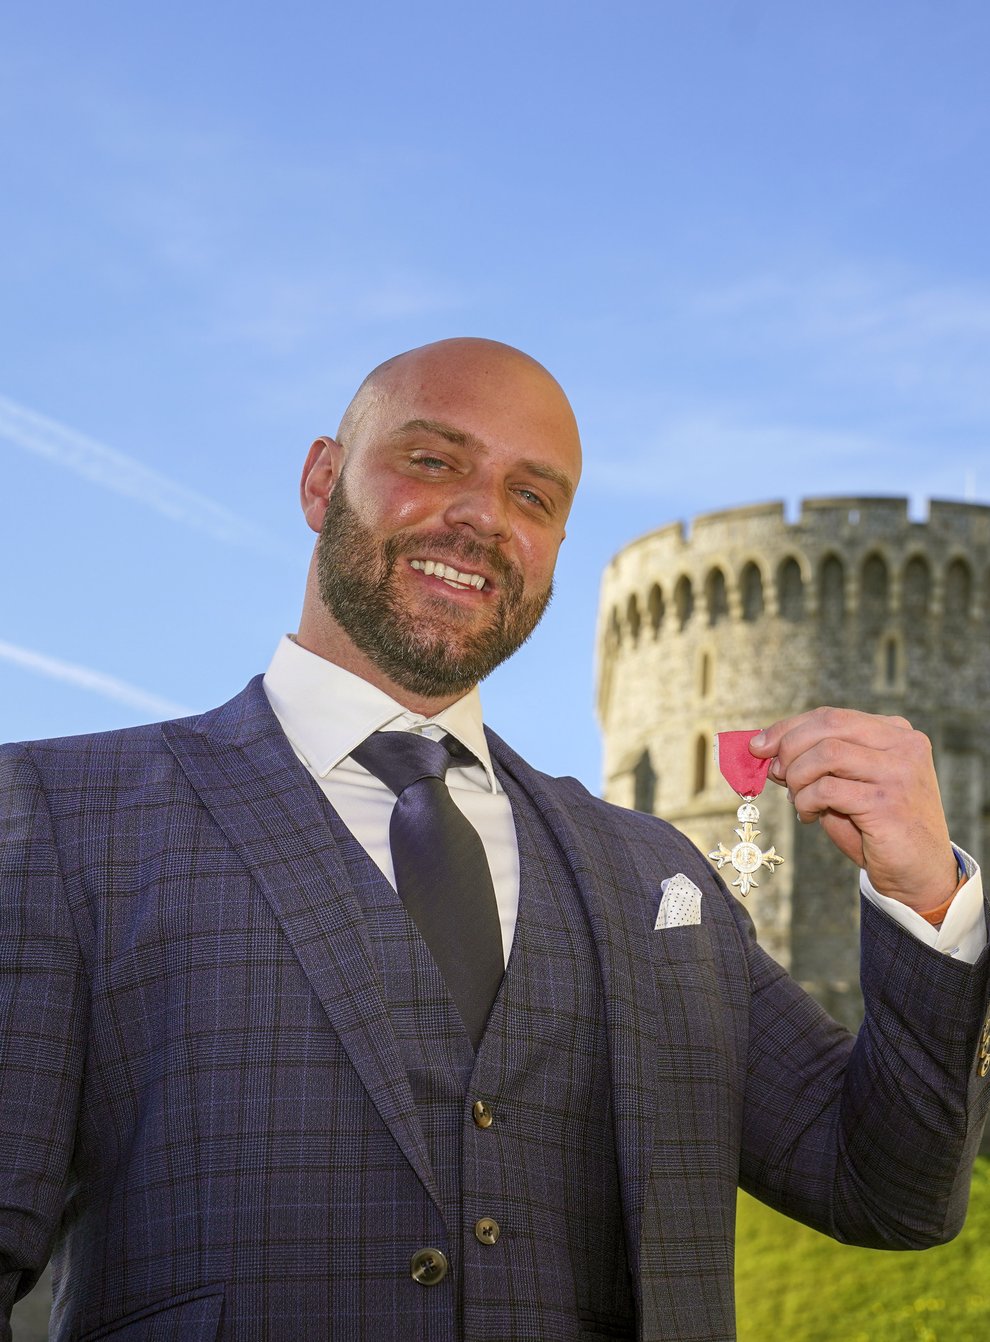 Personal trainer Mike Hind collected his MBE at Windsor Castle after walking 250 miles to get there (Steve Parsons/PA)